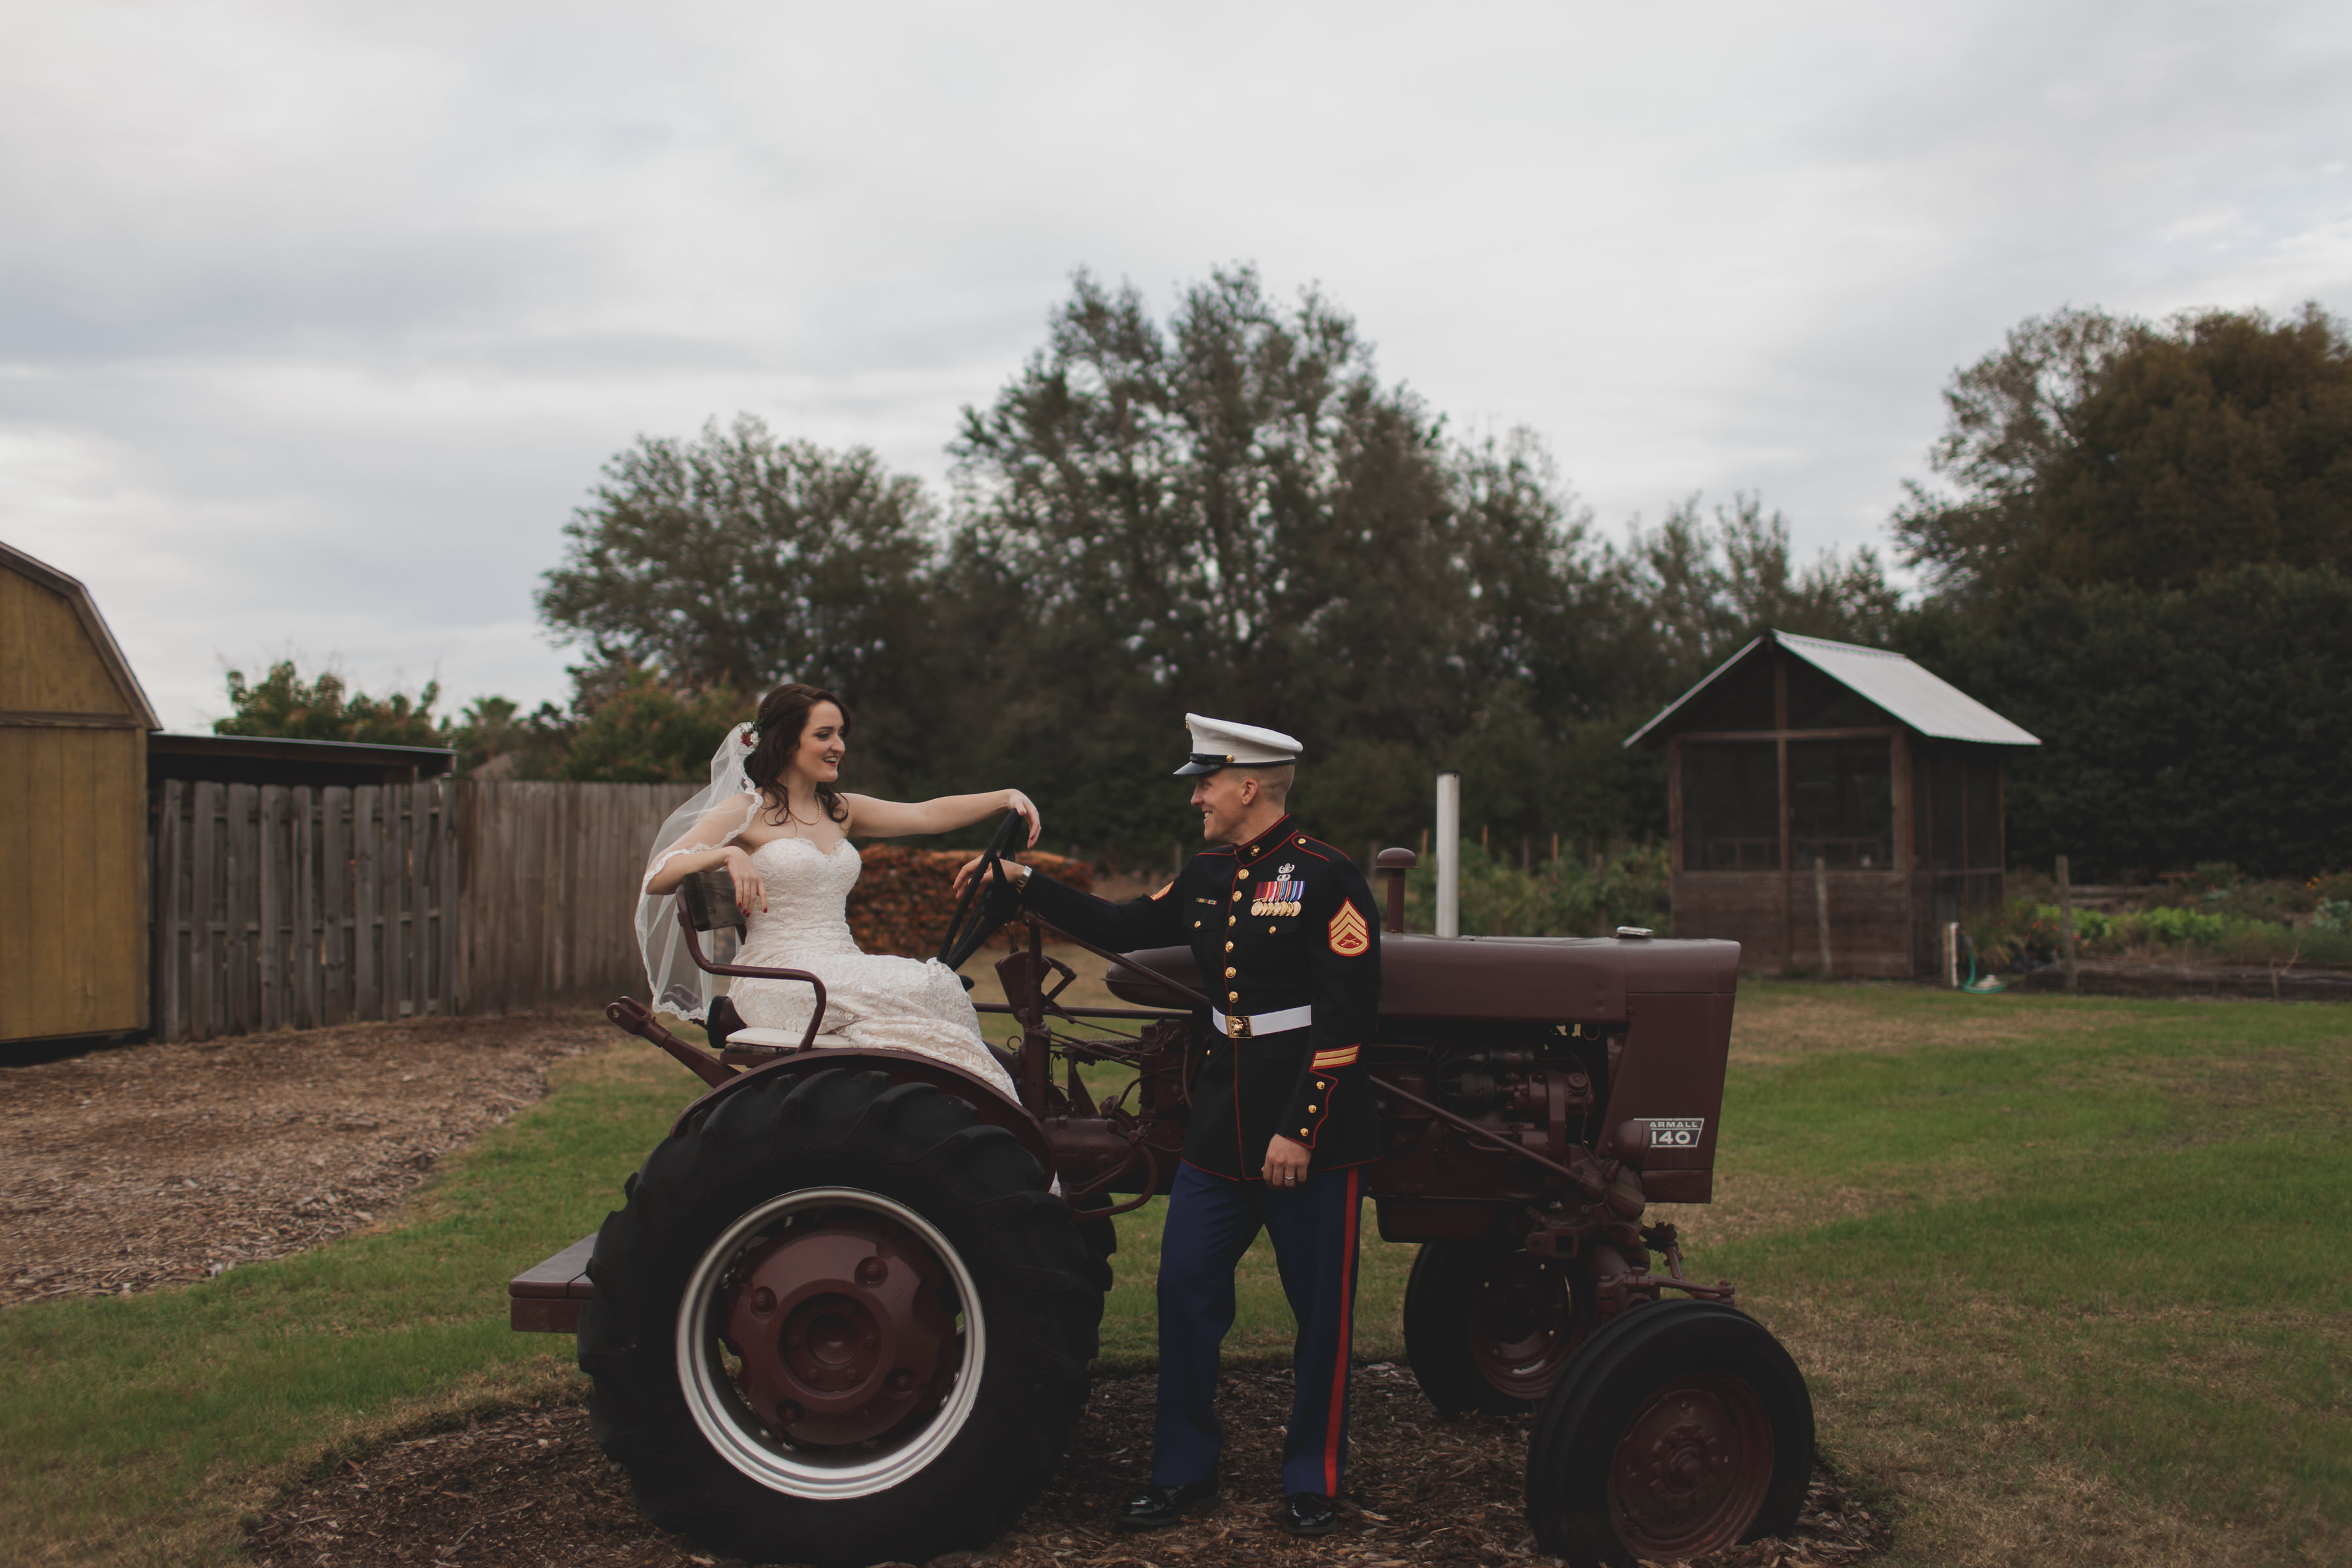 Rustic Farm Wedding Outdoor Bride and Groom Portrait with Tractor, Bride in Strapless Stella York Wedding Dress with Long Veil, Groom in Marine Dress Uniform | Tampa Bay Wedding Photographer Stacy Paul Photography